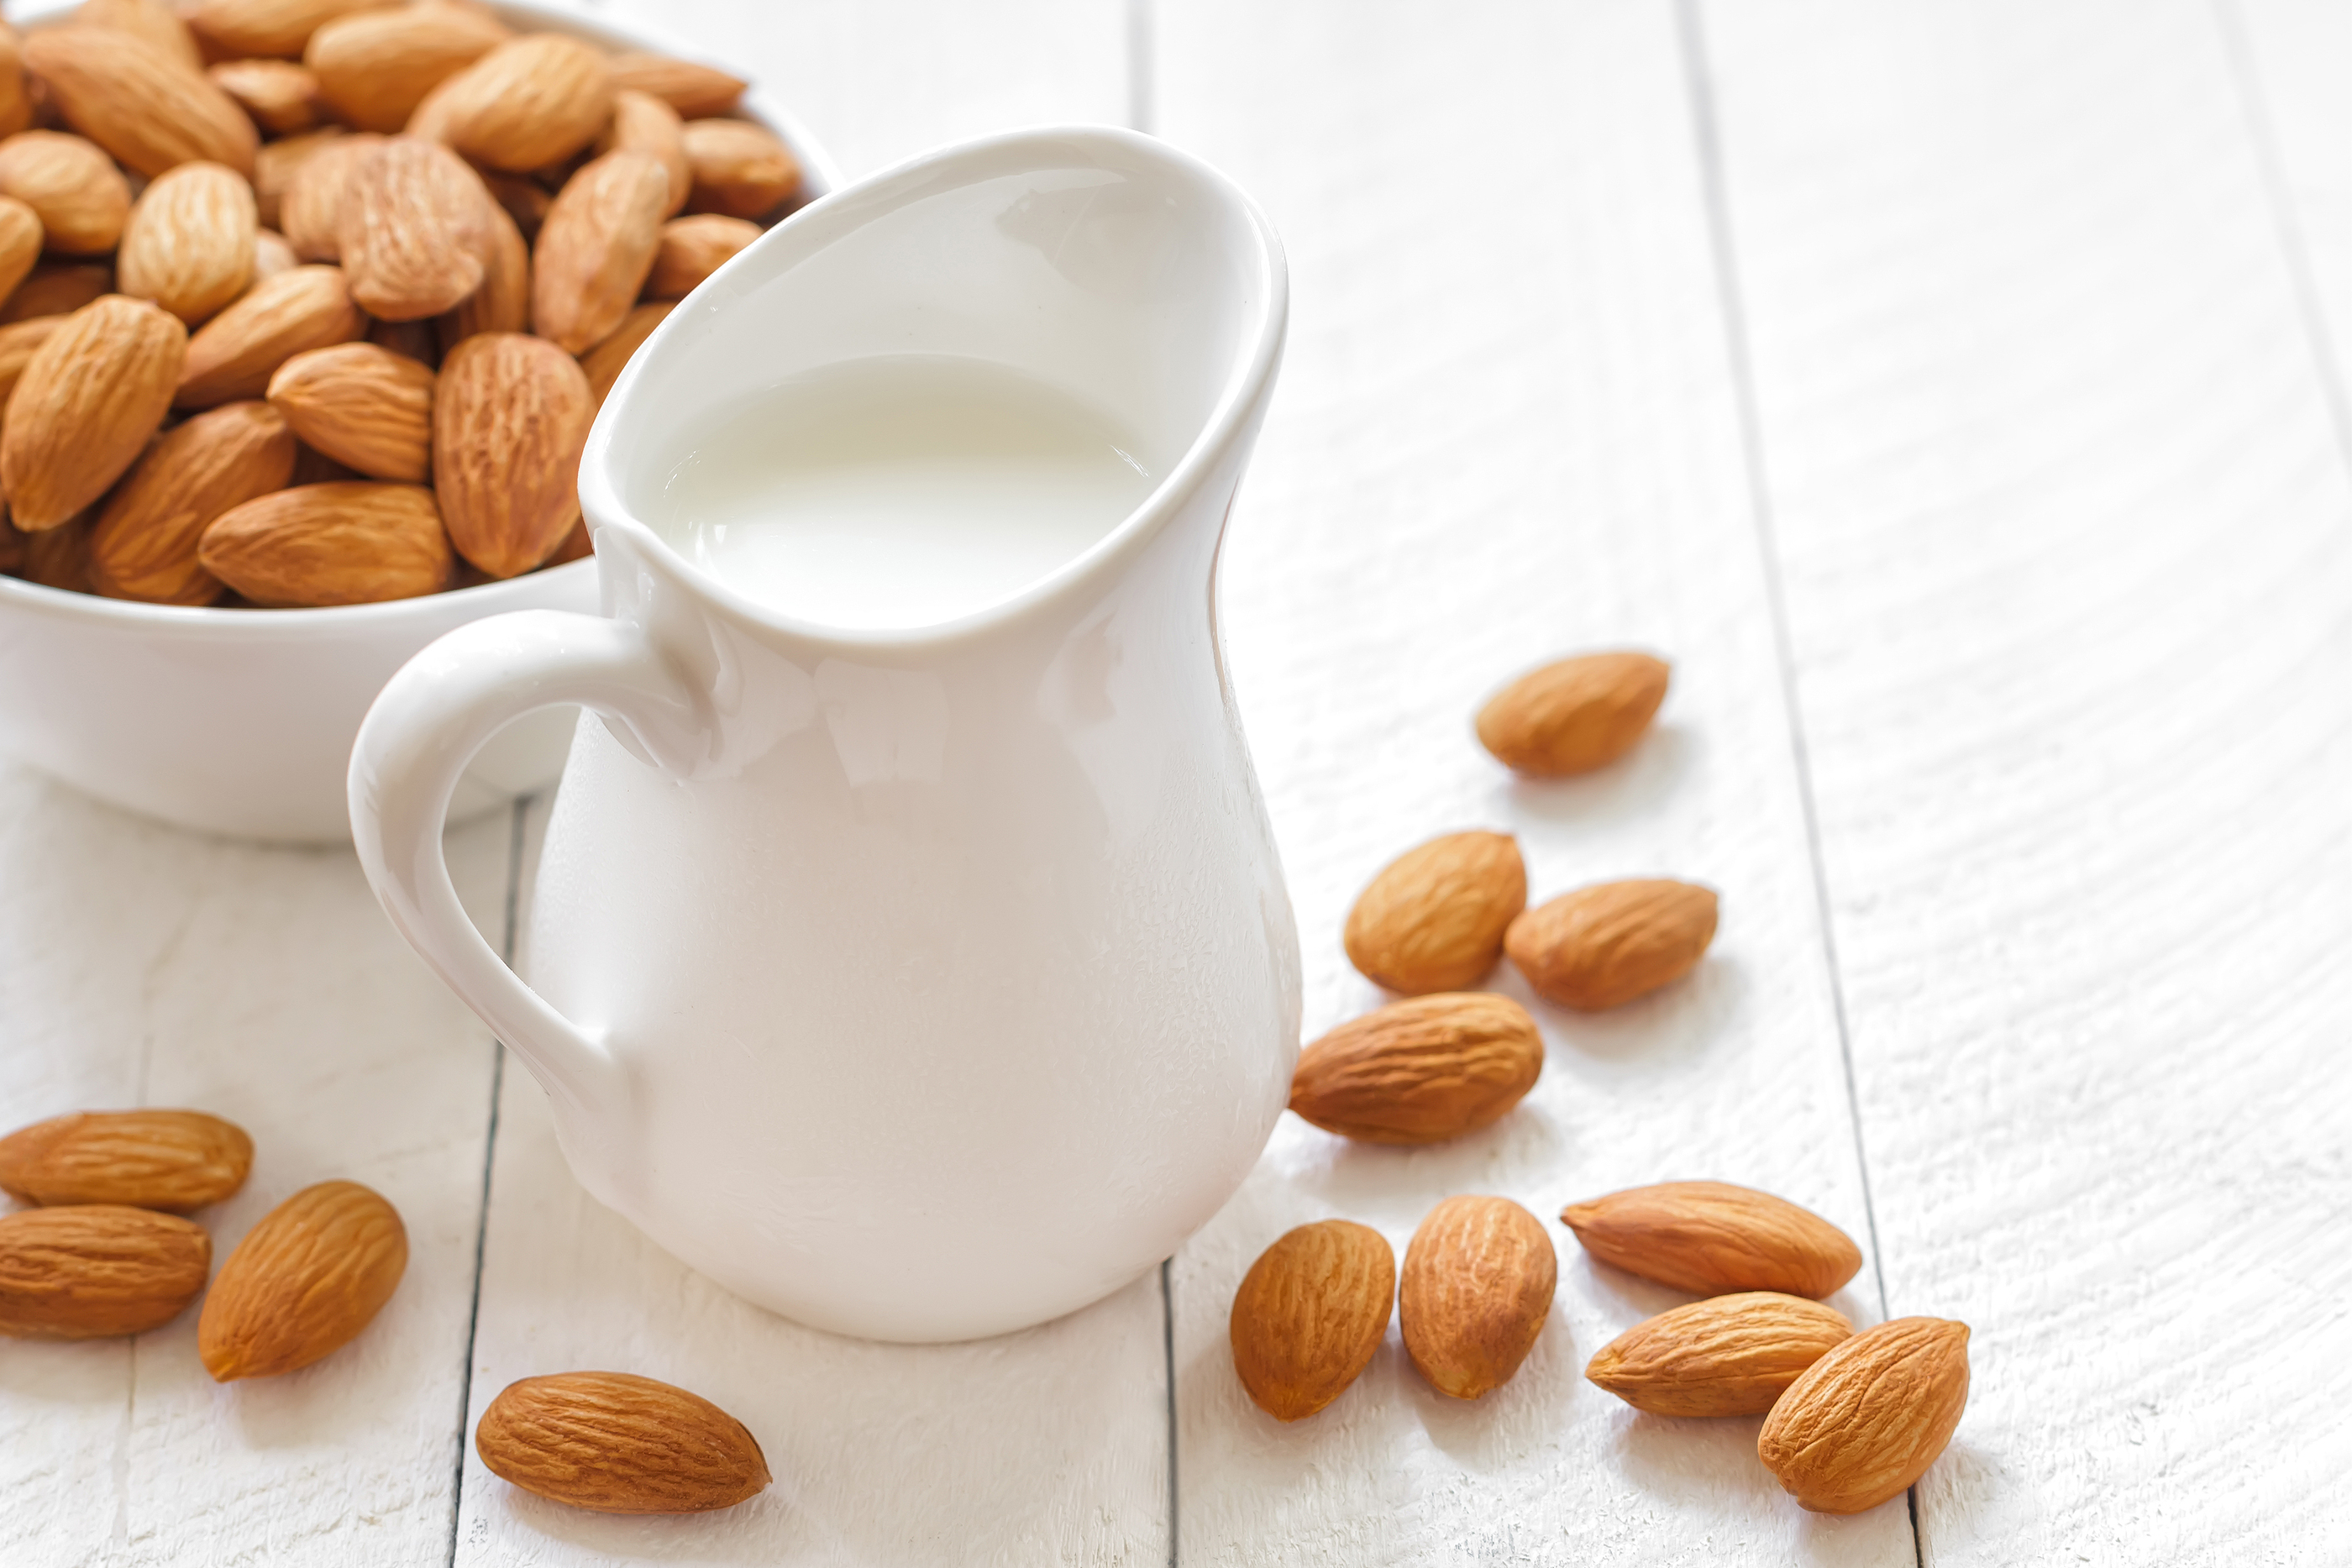 Swapping dairy for almond milk

Alternatives to dairy milk have been gaining popularity, almond milk being a strong contender. However, it practically has no nutrients at all. Almonds are protein powerhouses on their own, but a typical glass of almond milk contains about 2% almonds and almost no protein. Opt for soy milk or low-fat milk if you’re actually looking for a healthier option.